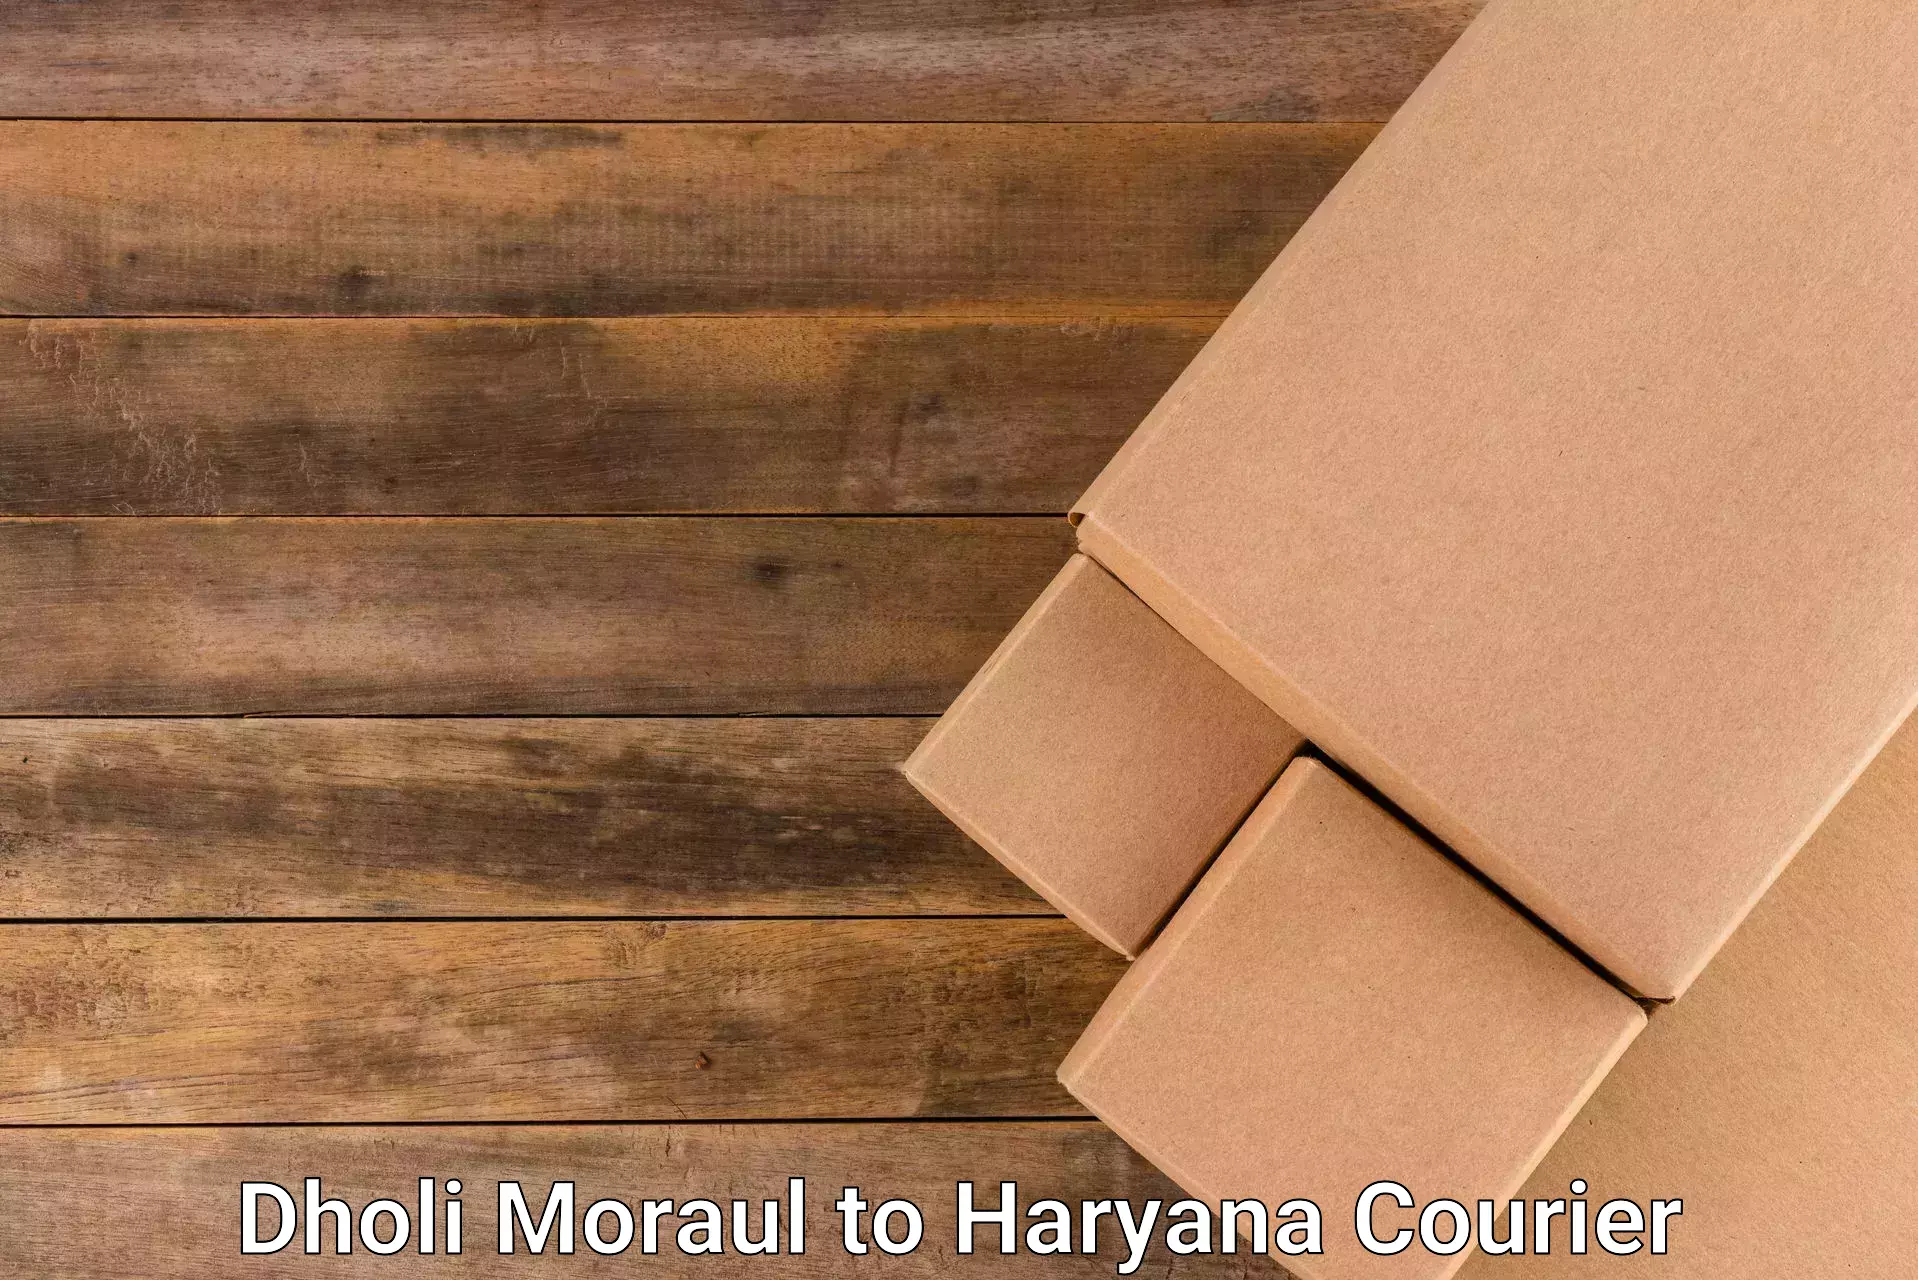 Nationwide delivery network Dholi Moraul to NCR Haryana